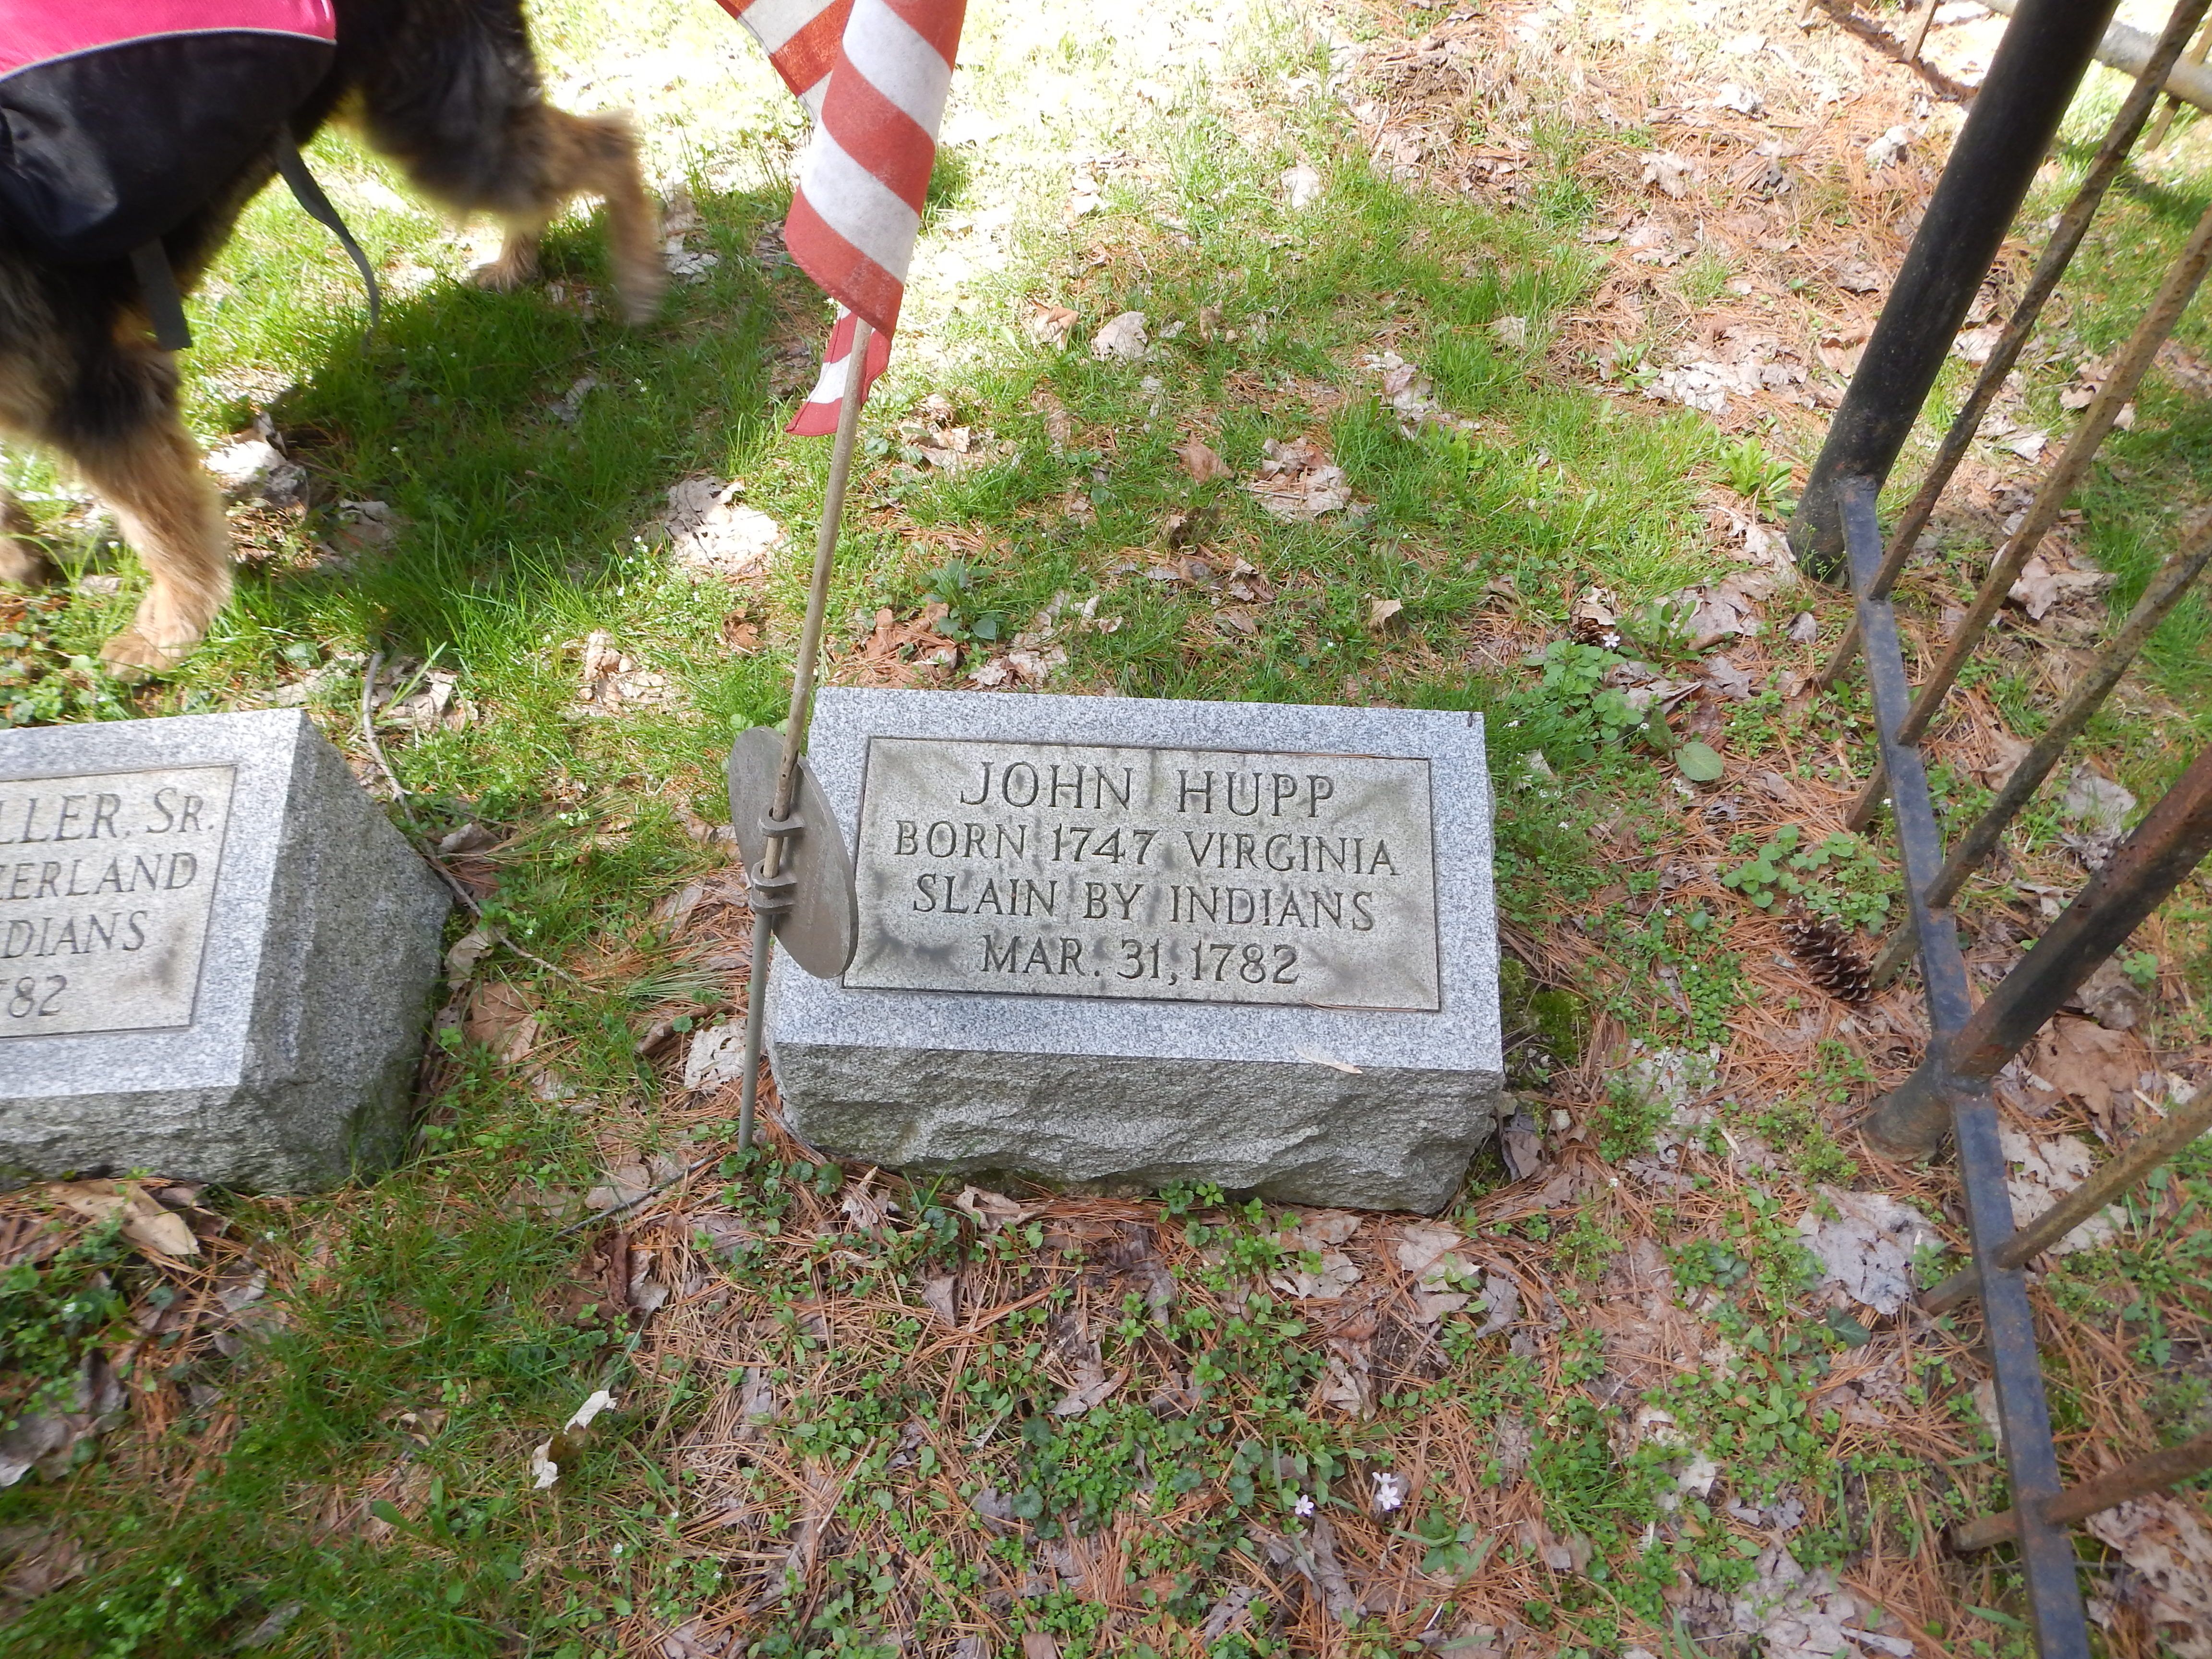 John Hupp, body moved to his private burial plot on his farm several yrs later. Memorial stone to commemorate his participation in the battle.